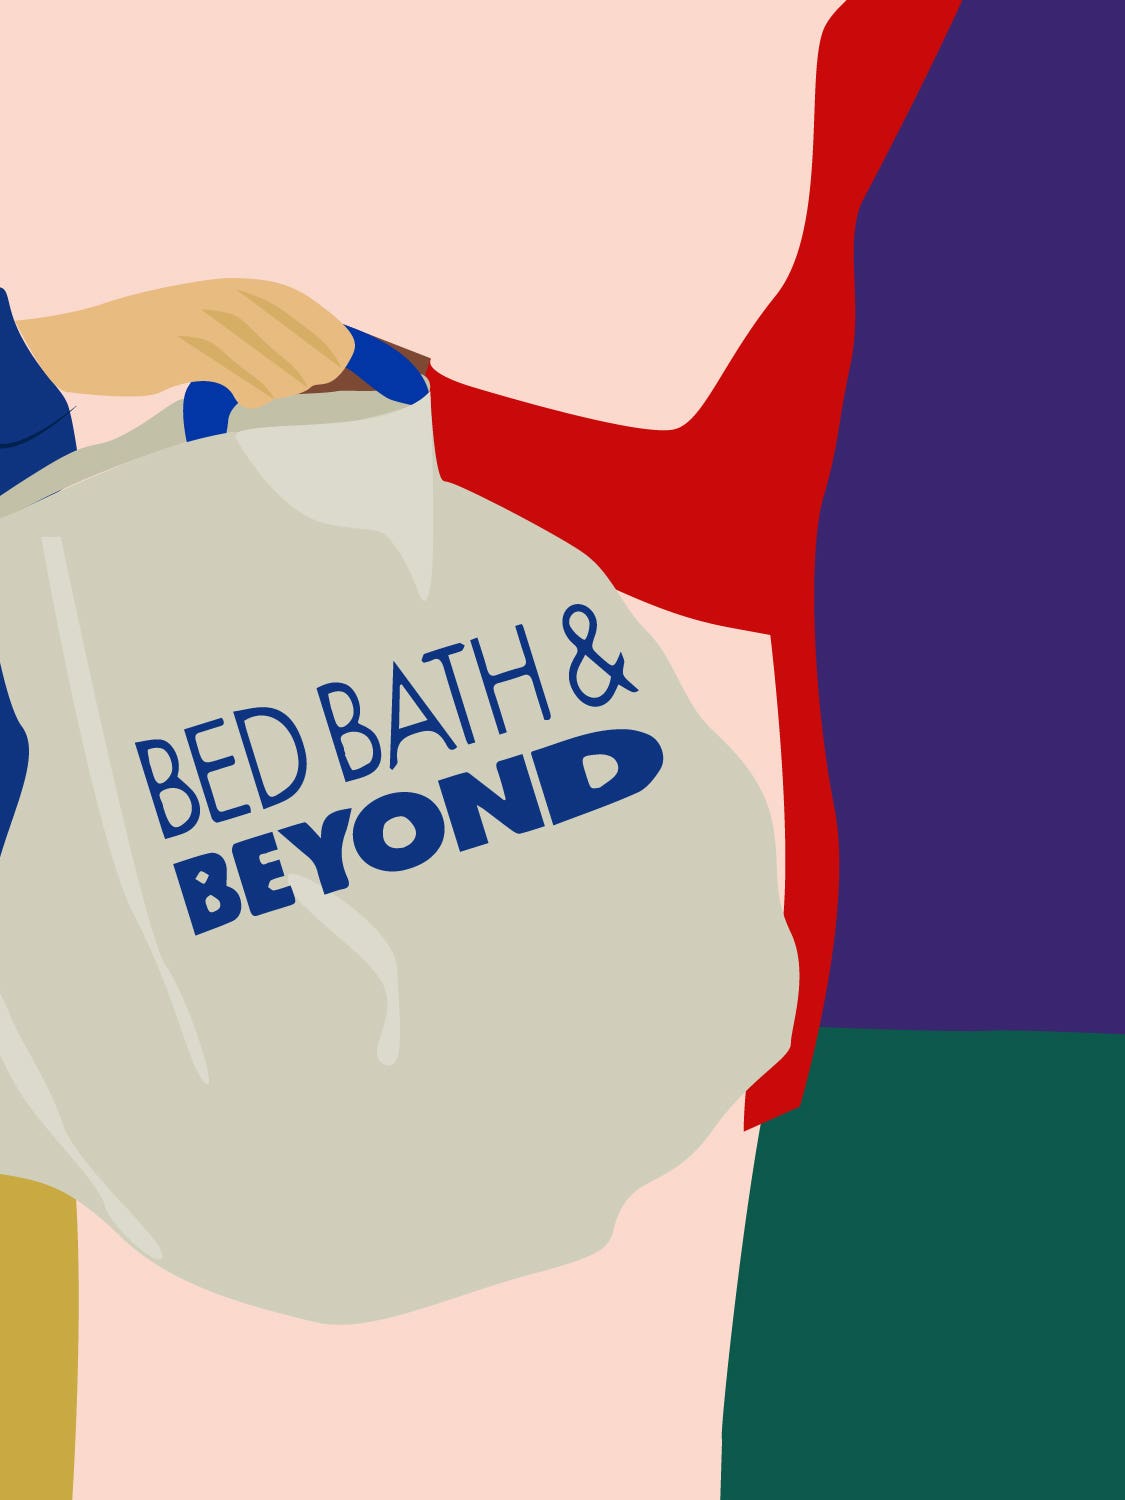 How to Save Serious $ at Your Next Trip to Bed Bath & Beyond